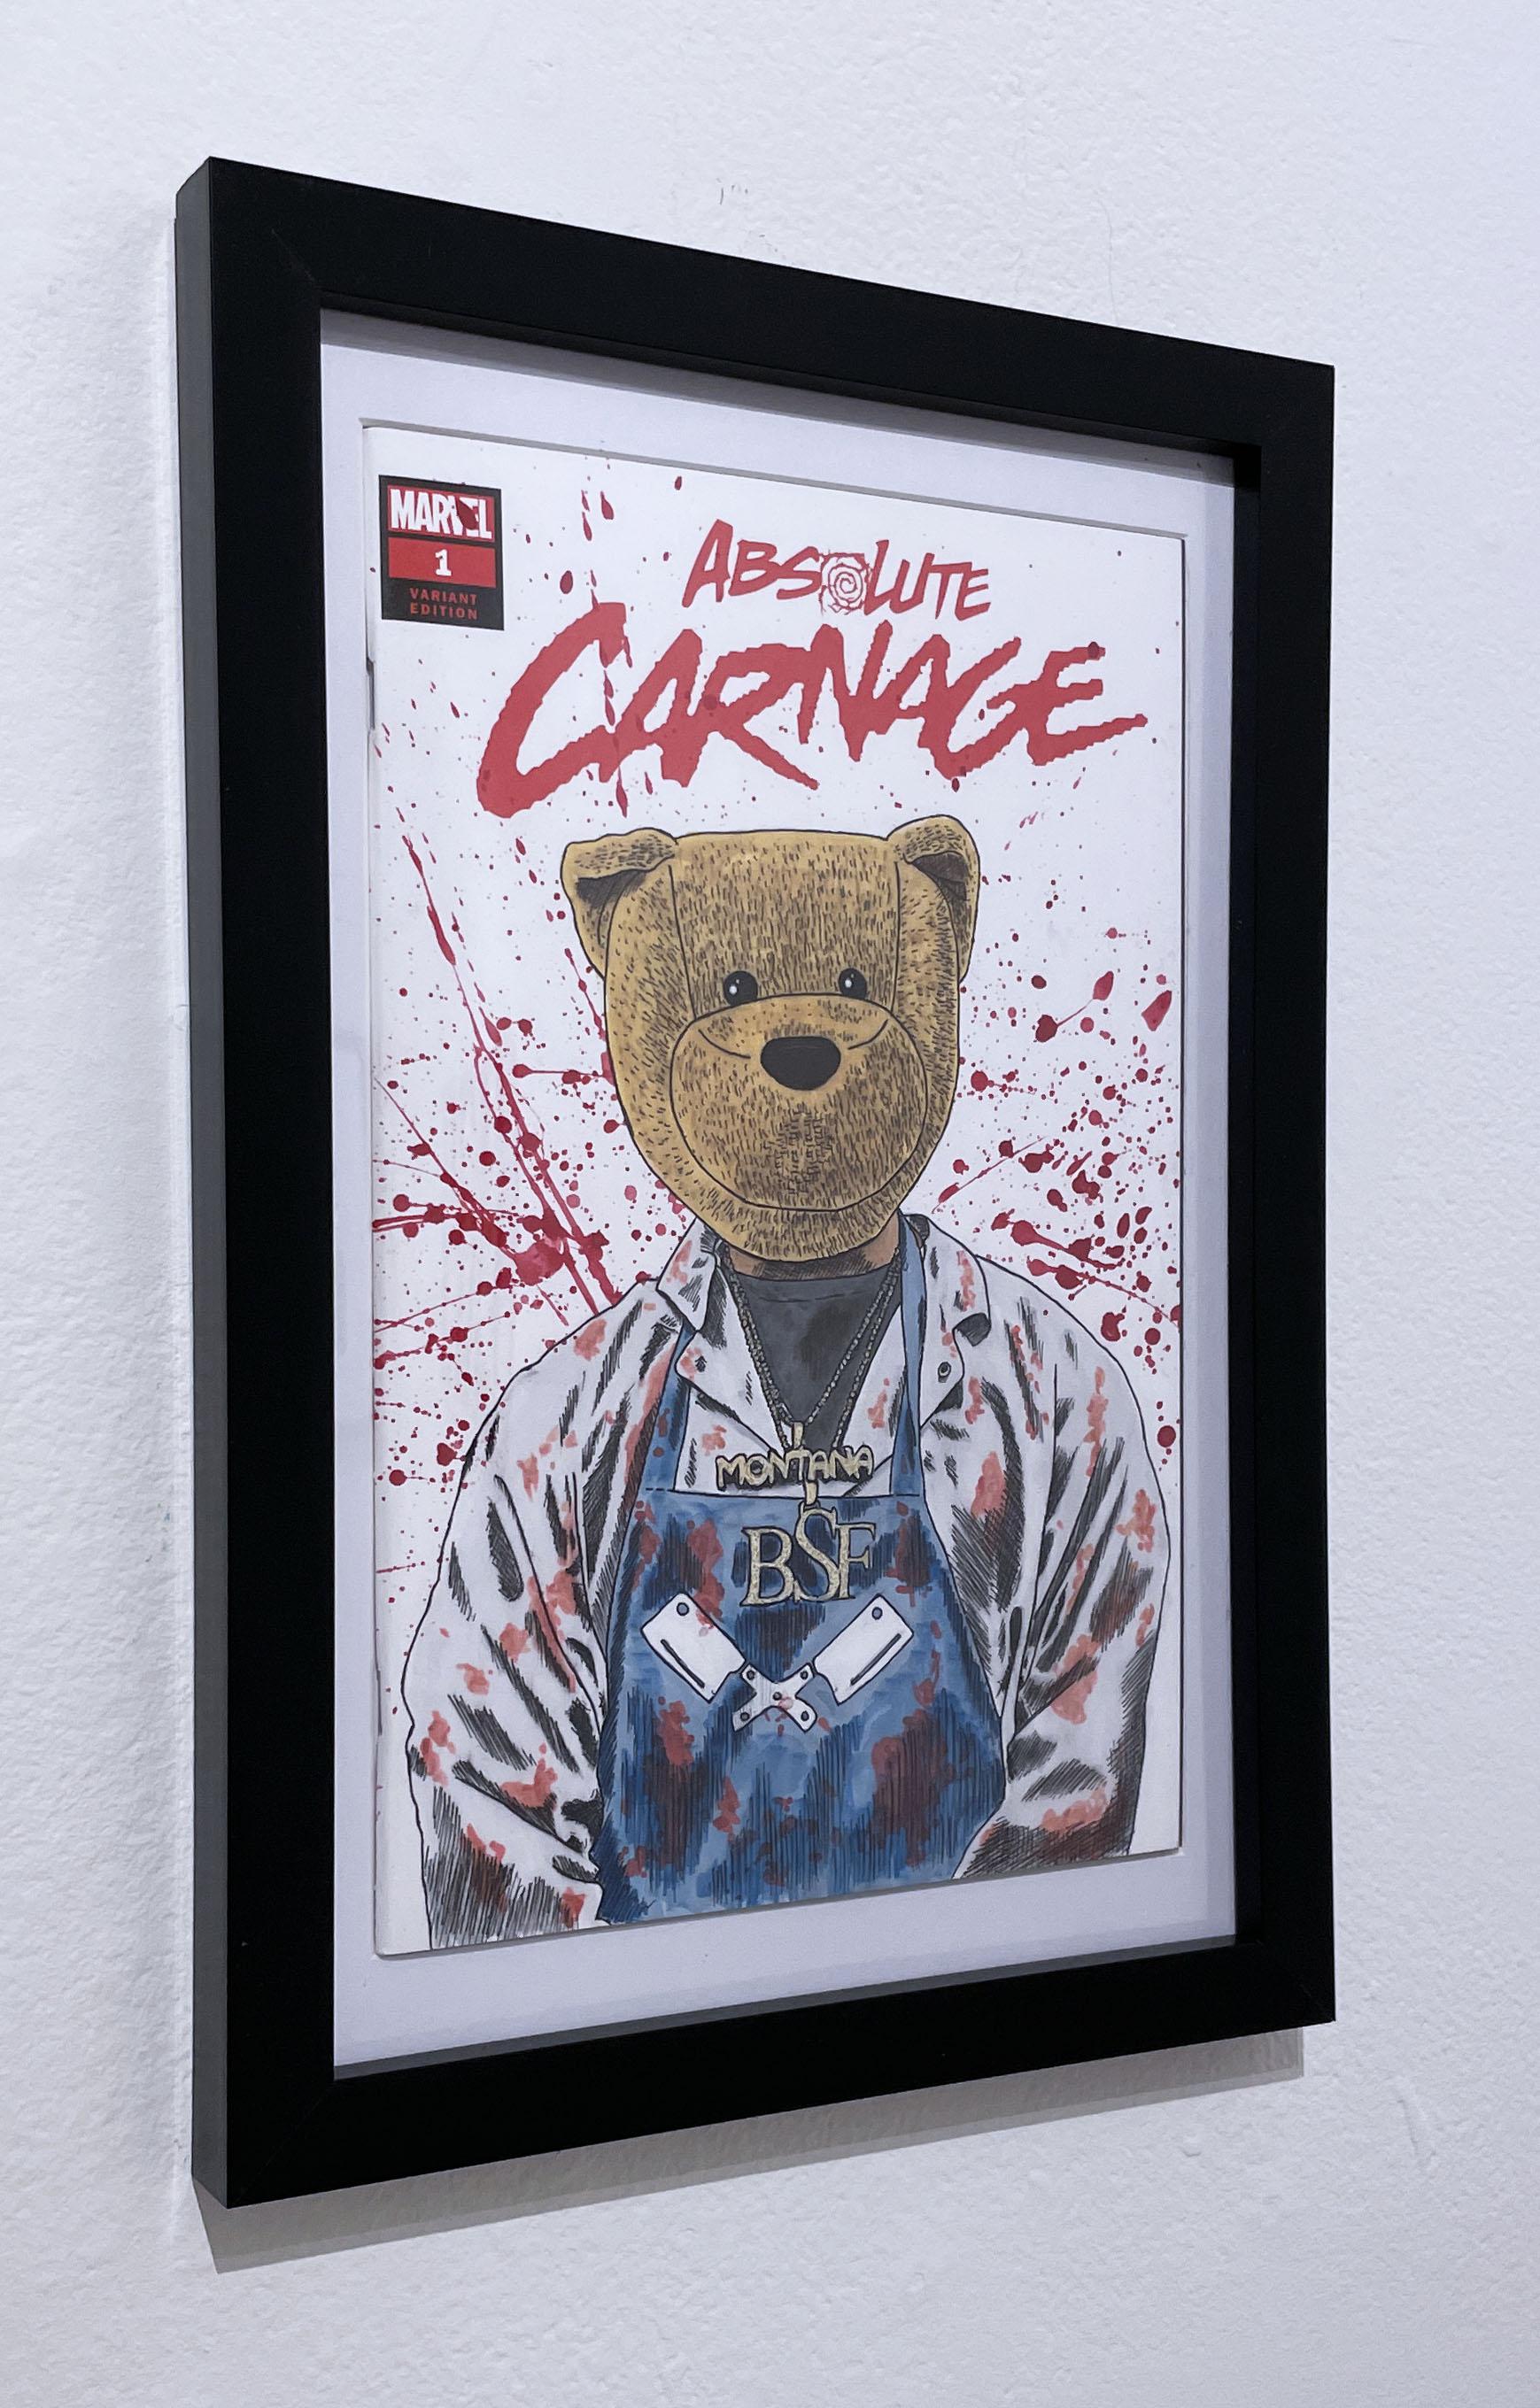 Absolute Carnage (2021) by S9L, comic book portrait of rapper Benny the Butcher - Art by Sean 9 Lugo